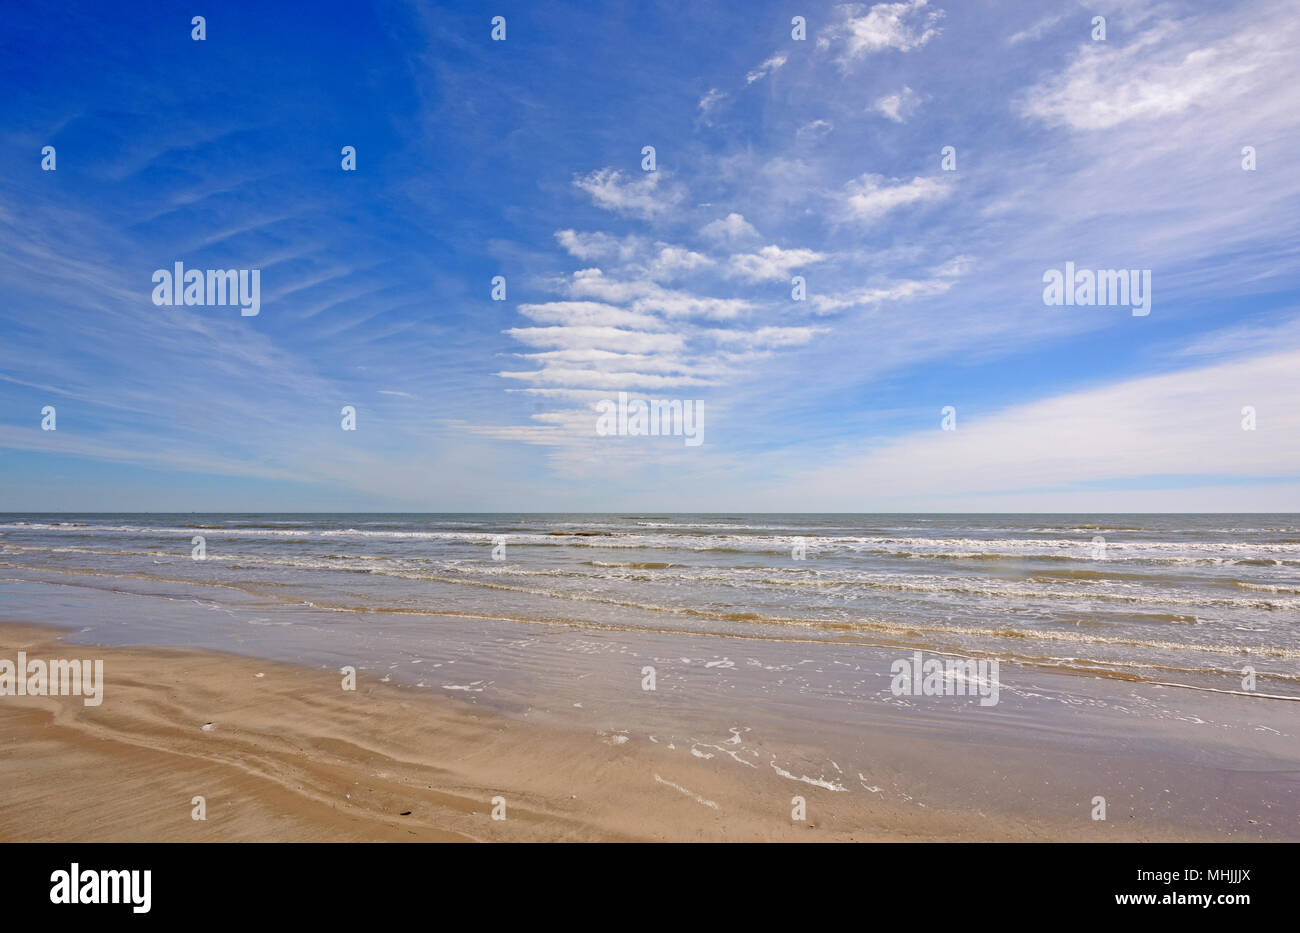 Cloud Patterns over an Ocean Beach on Padre Island National Seashore in Texas Stock Photo